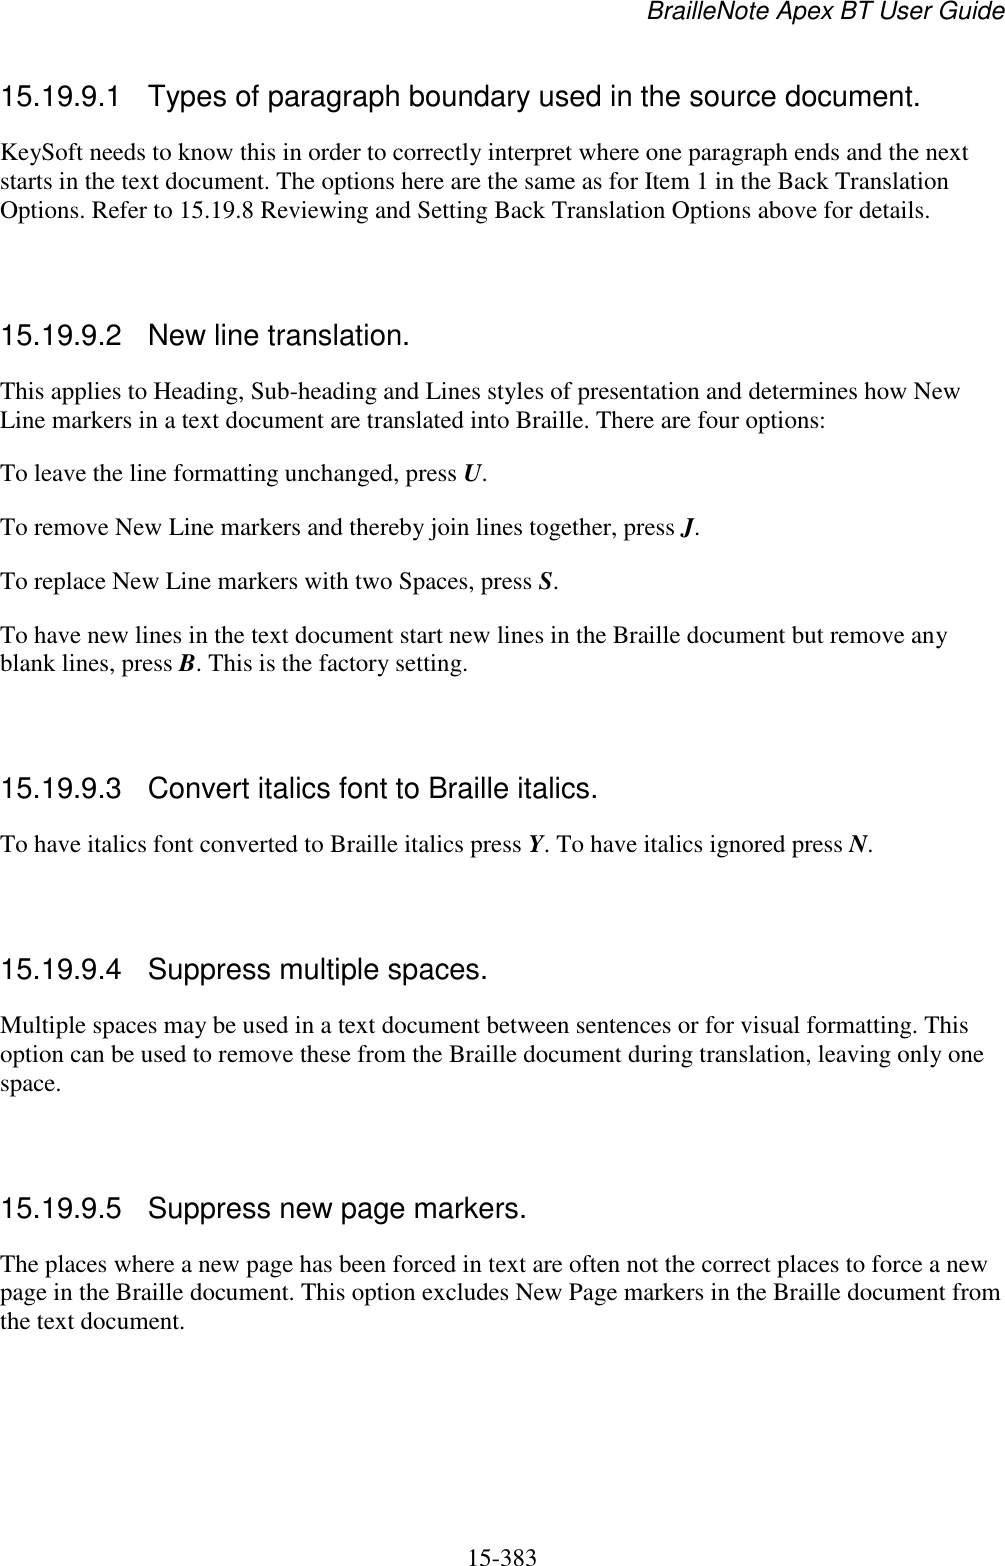 BrailleNote Apex BT User Guide   15-383   15.19.9.1  Types of paragraph boundary used in the source document. KeySoft needs to know this in order to correctly interpret where one paragraph ends and the next starts in the text document. The options here are the same as for Item 1 in the Back Translation Options. Refer to 15.19.8 Reviewing and Setting Back Translation Options above for details.   15.19.9.2  New line translation. This applies to Heading, Sub-heading and Lines styles of presentation and determines how New Line markers in a text document are translated into Braille. There are four options: To leave the line formatting unchanged, press U. To remove New Line markers and thereby join lines together, press J. To replace New Line markers with two Spaces, press S. To have new lines in the text document start new lines in the Braille document but remove any blank lines, press B. This is the factory setting.   15.19.9.3  Convert italics font to Braille italics. To have italics font converted to Braille italics press Y. To have italics ignored press N.   15.19.9.4  Suppress multiple spaces. Multiple spaces may be used in a text document between sentences or for visual formatting. This option can be used to remove these from the Braille document during translation, leaving only one space.   15.19.9.5  Suppress new page markers. The places where a new page has been forced in text are often not the correct places to force a new page in the Braille document. This option excludes New Page markers in the Braille document from the text document.   